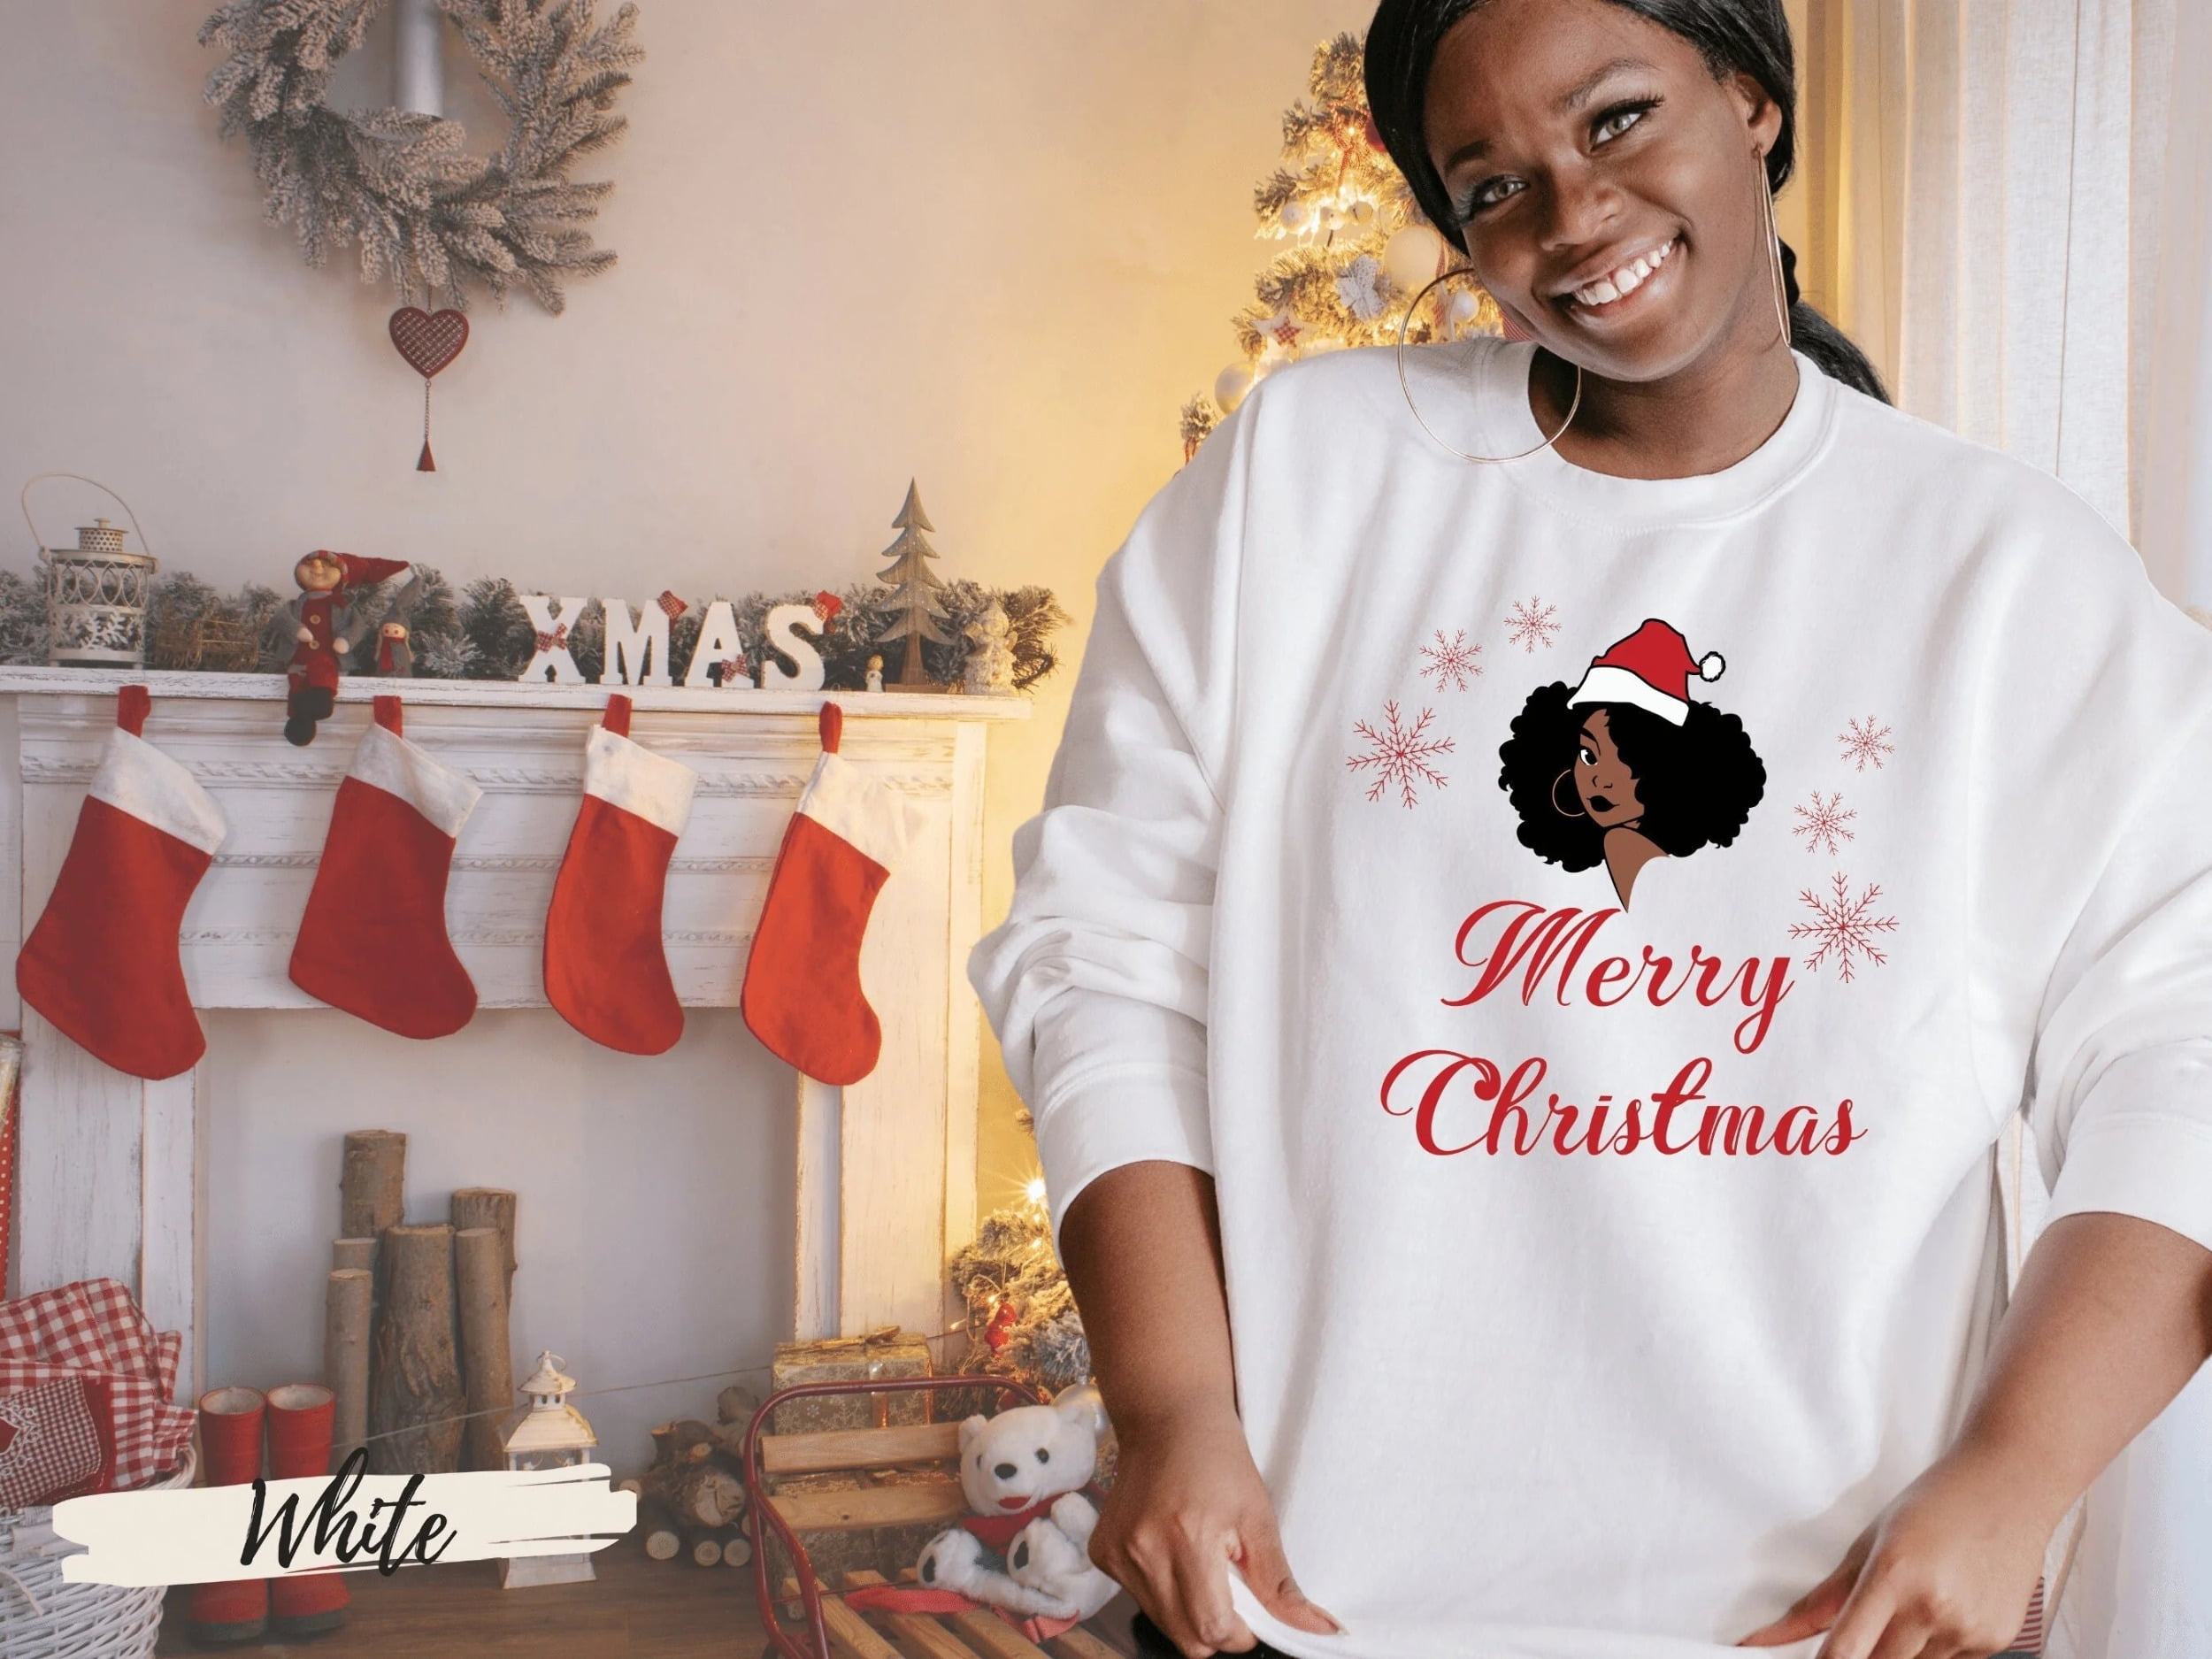 SHAOBGE Christmas Shirt for Women Sublimation Sweatshirt Polyester Women  Fashion Clothing Sibling Christmas Outfits